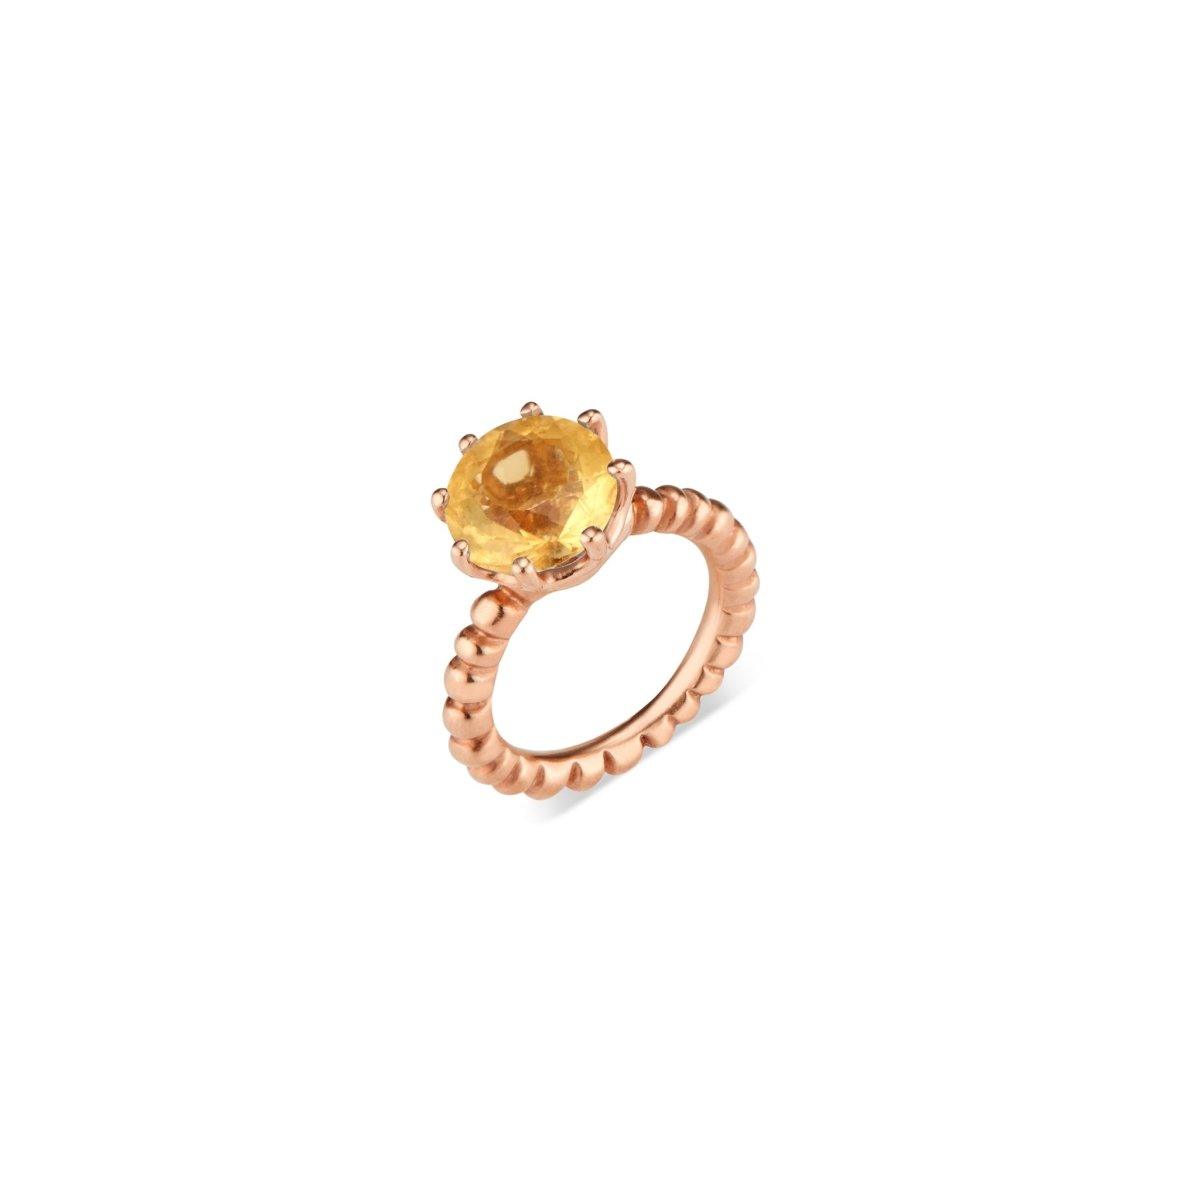 Rose Gold Crown Ring with Citrine - Nataly Aponte